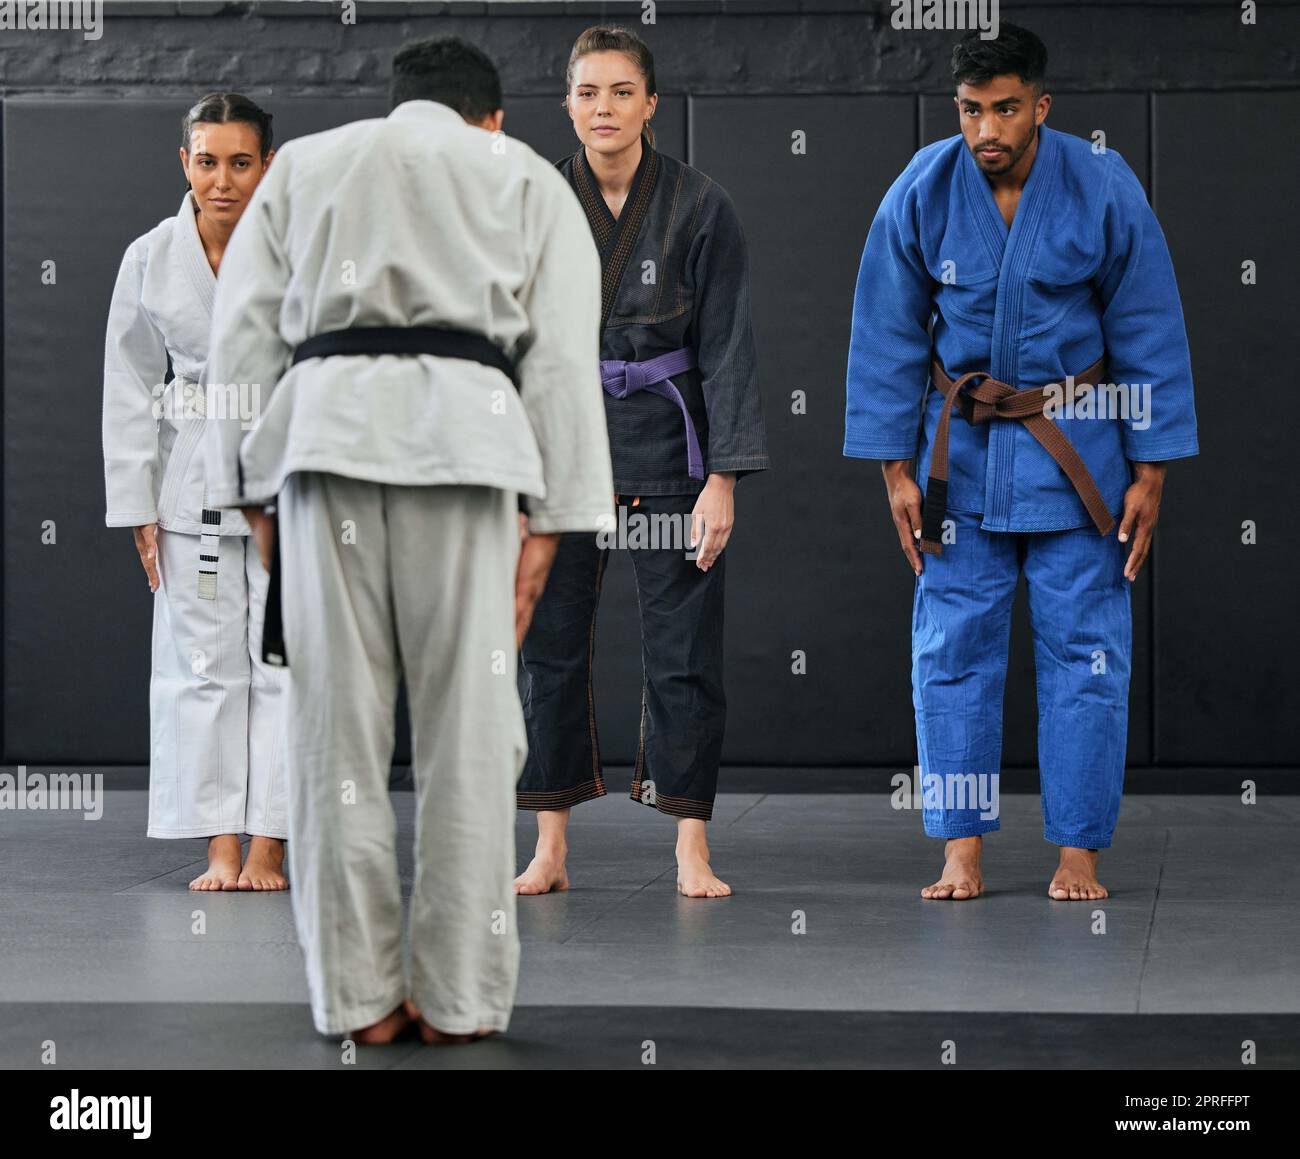 Karate coach teaching a fitness class at gym, students learning self defense training exercise with trainer and doing cardio workout at sports center. Healthy people doing martial arts hobby Stock Photo